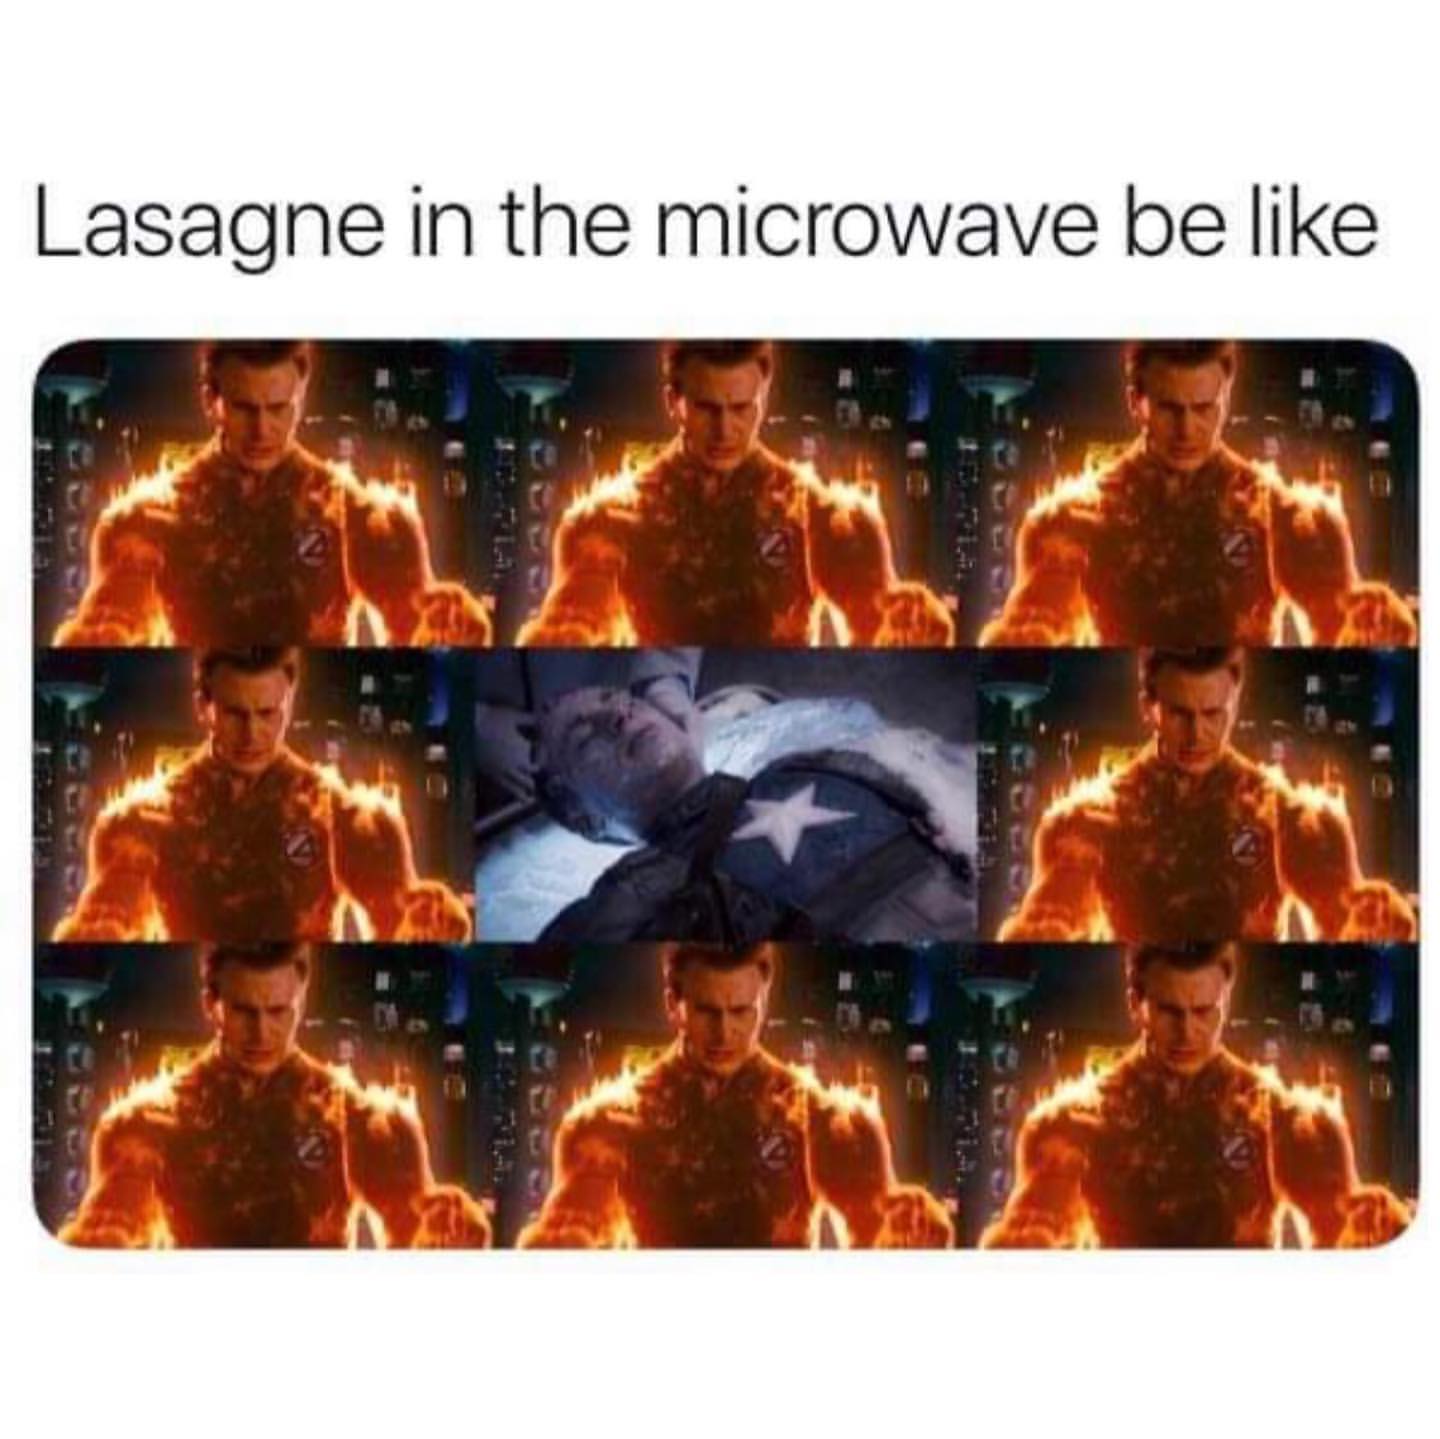 Lasagne in the microwave be like.